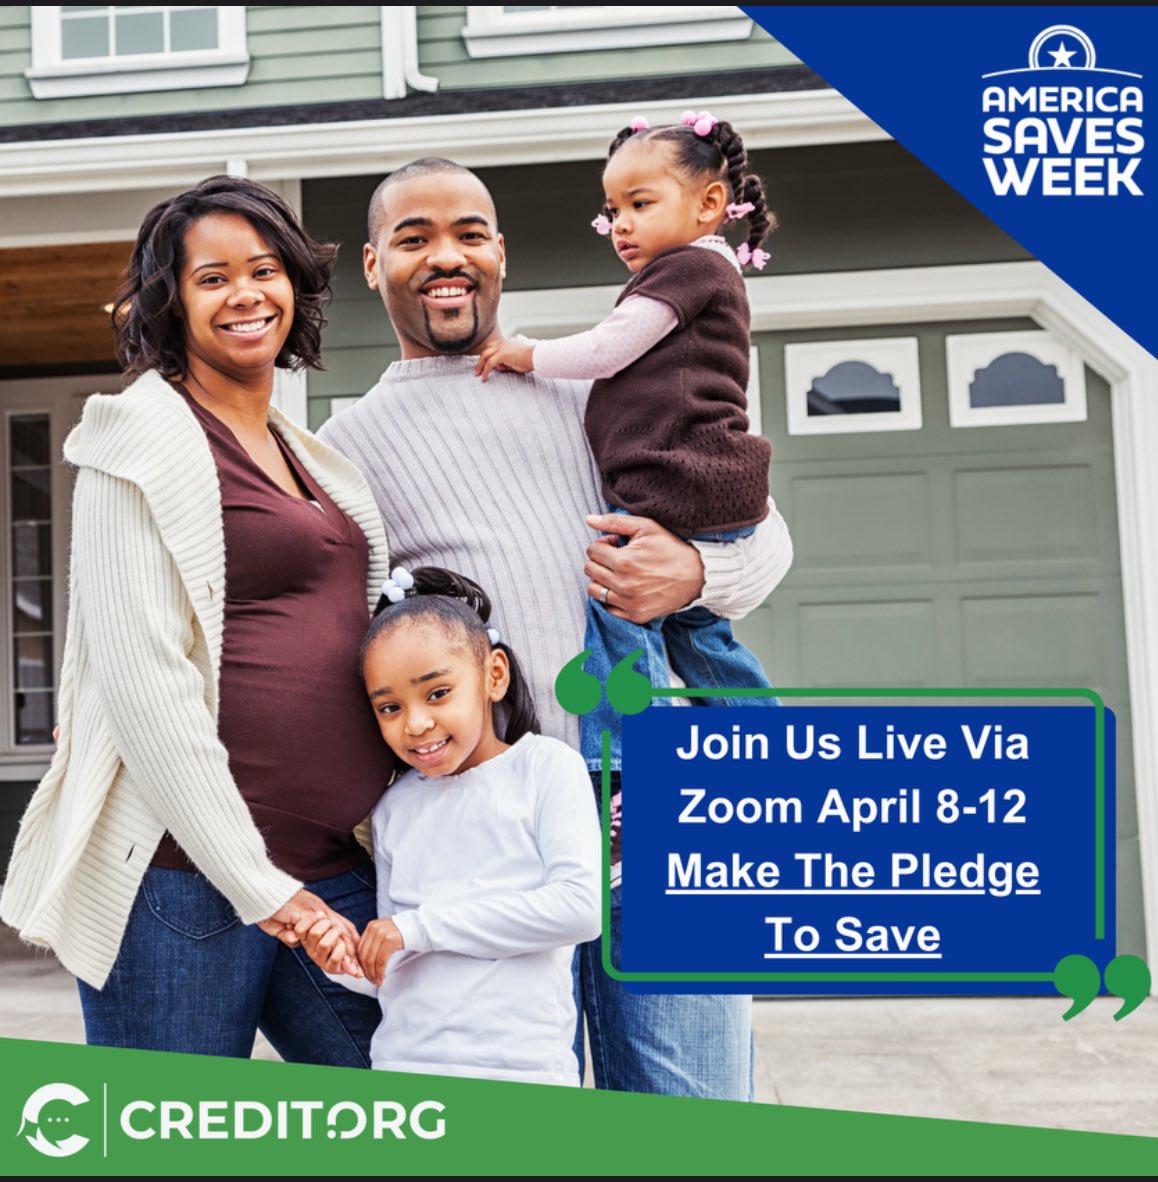 Credit.org celebrates again being awarded the Savings Champion Award for America Saves Week 2023. This honor is reserved for organizations, nonprofits, and government agencies that achieved remarkable impact during the annual America Saves Week campaign.
#ReduceDebt